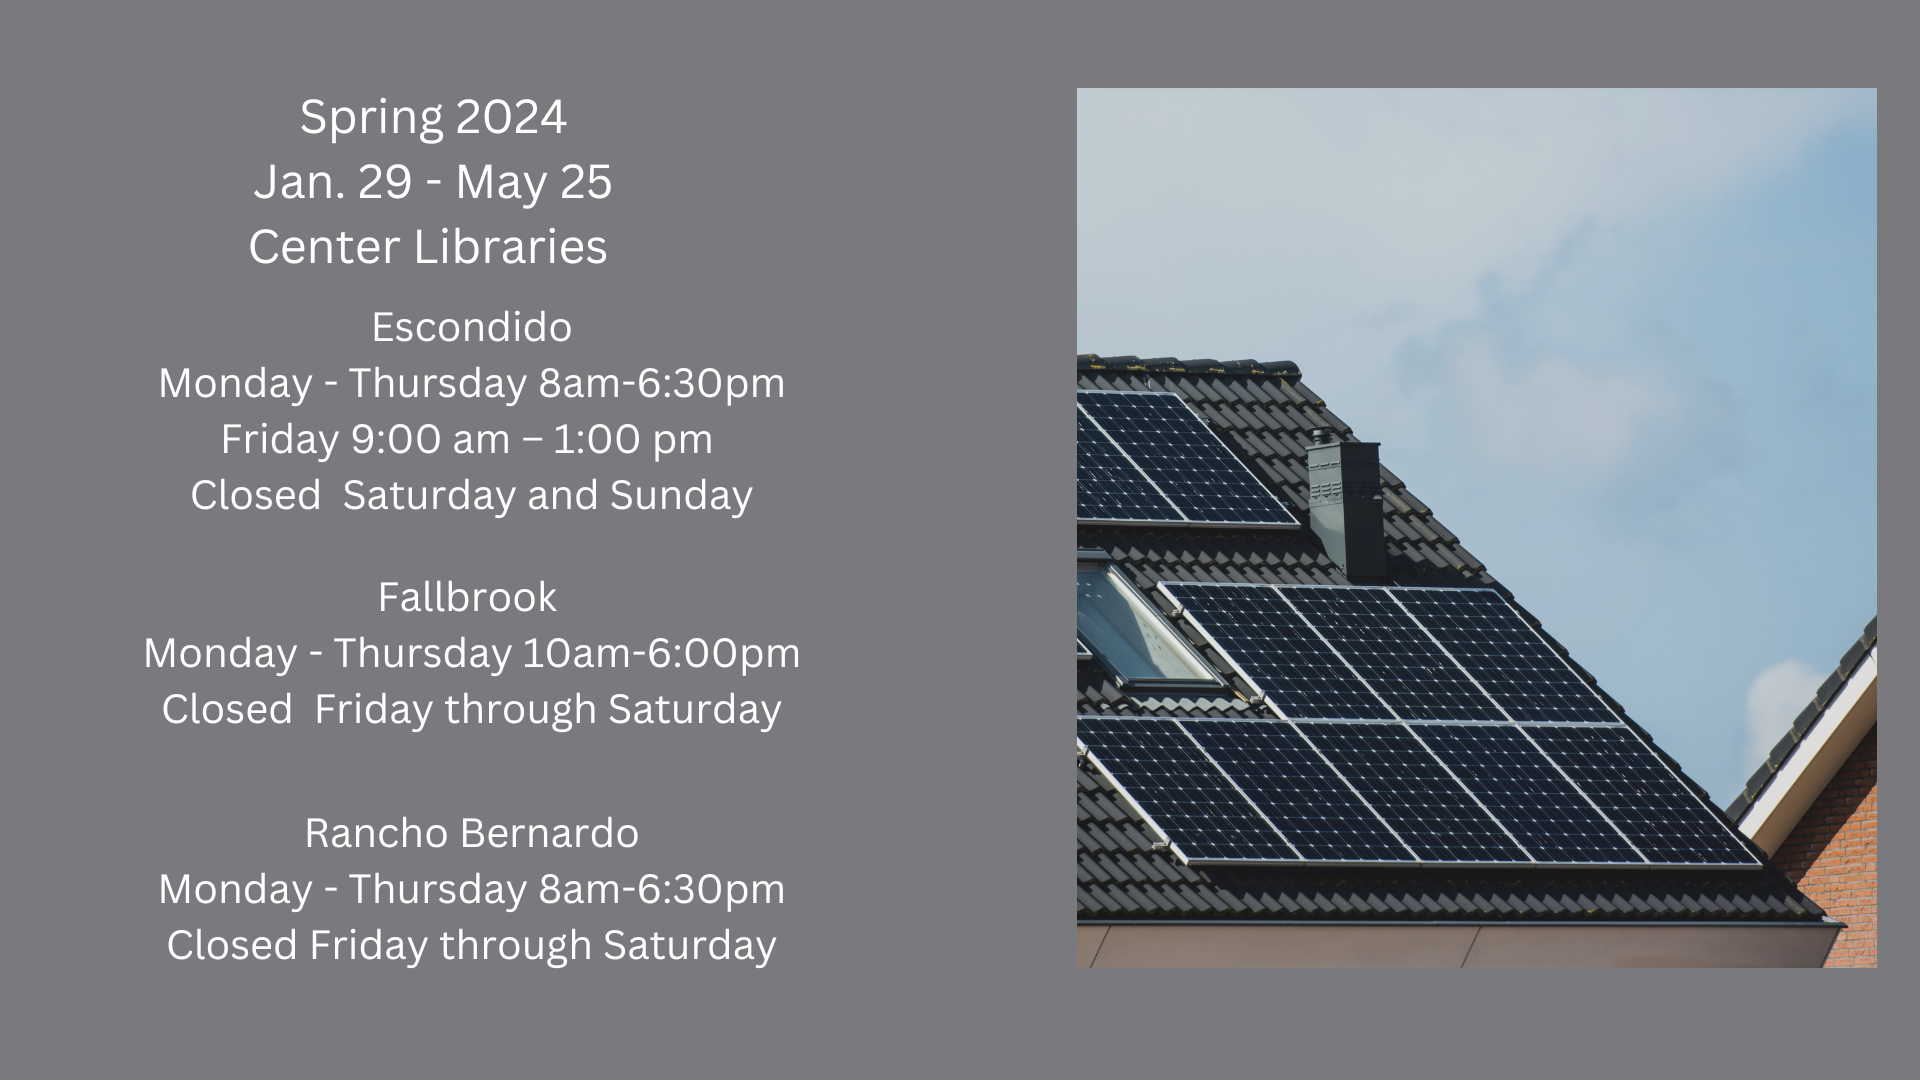 Spring 2024 Palomar Center Library Hours